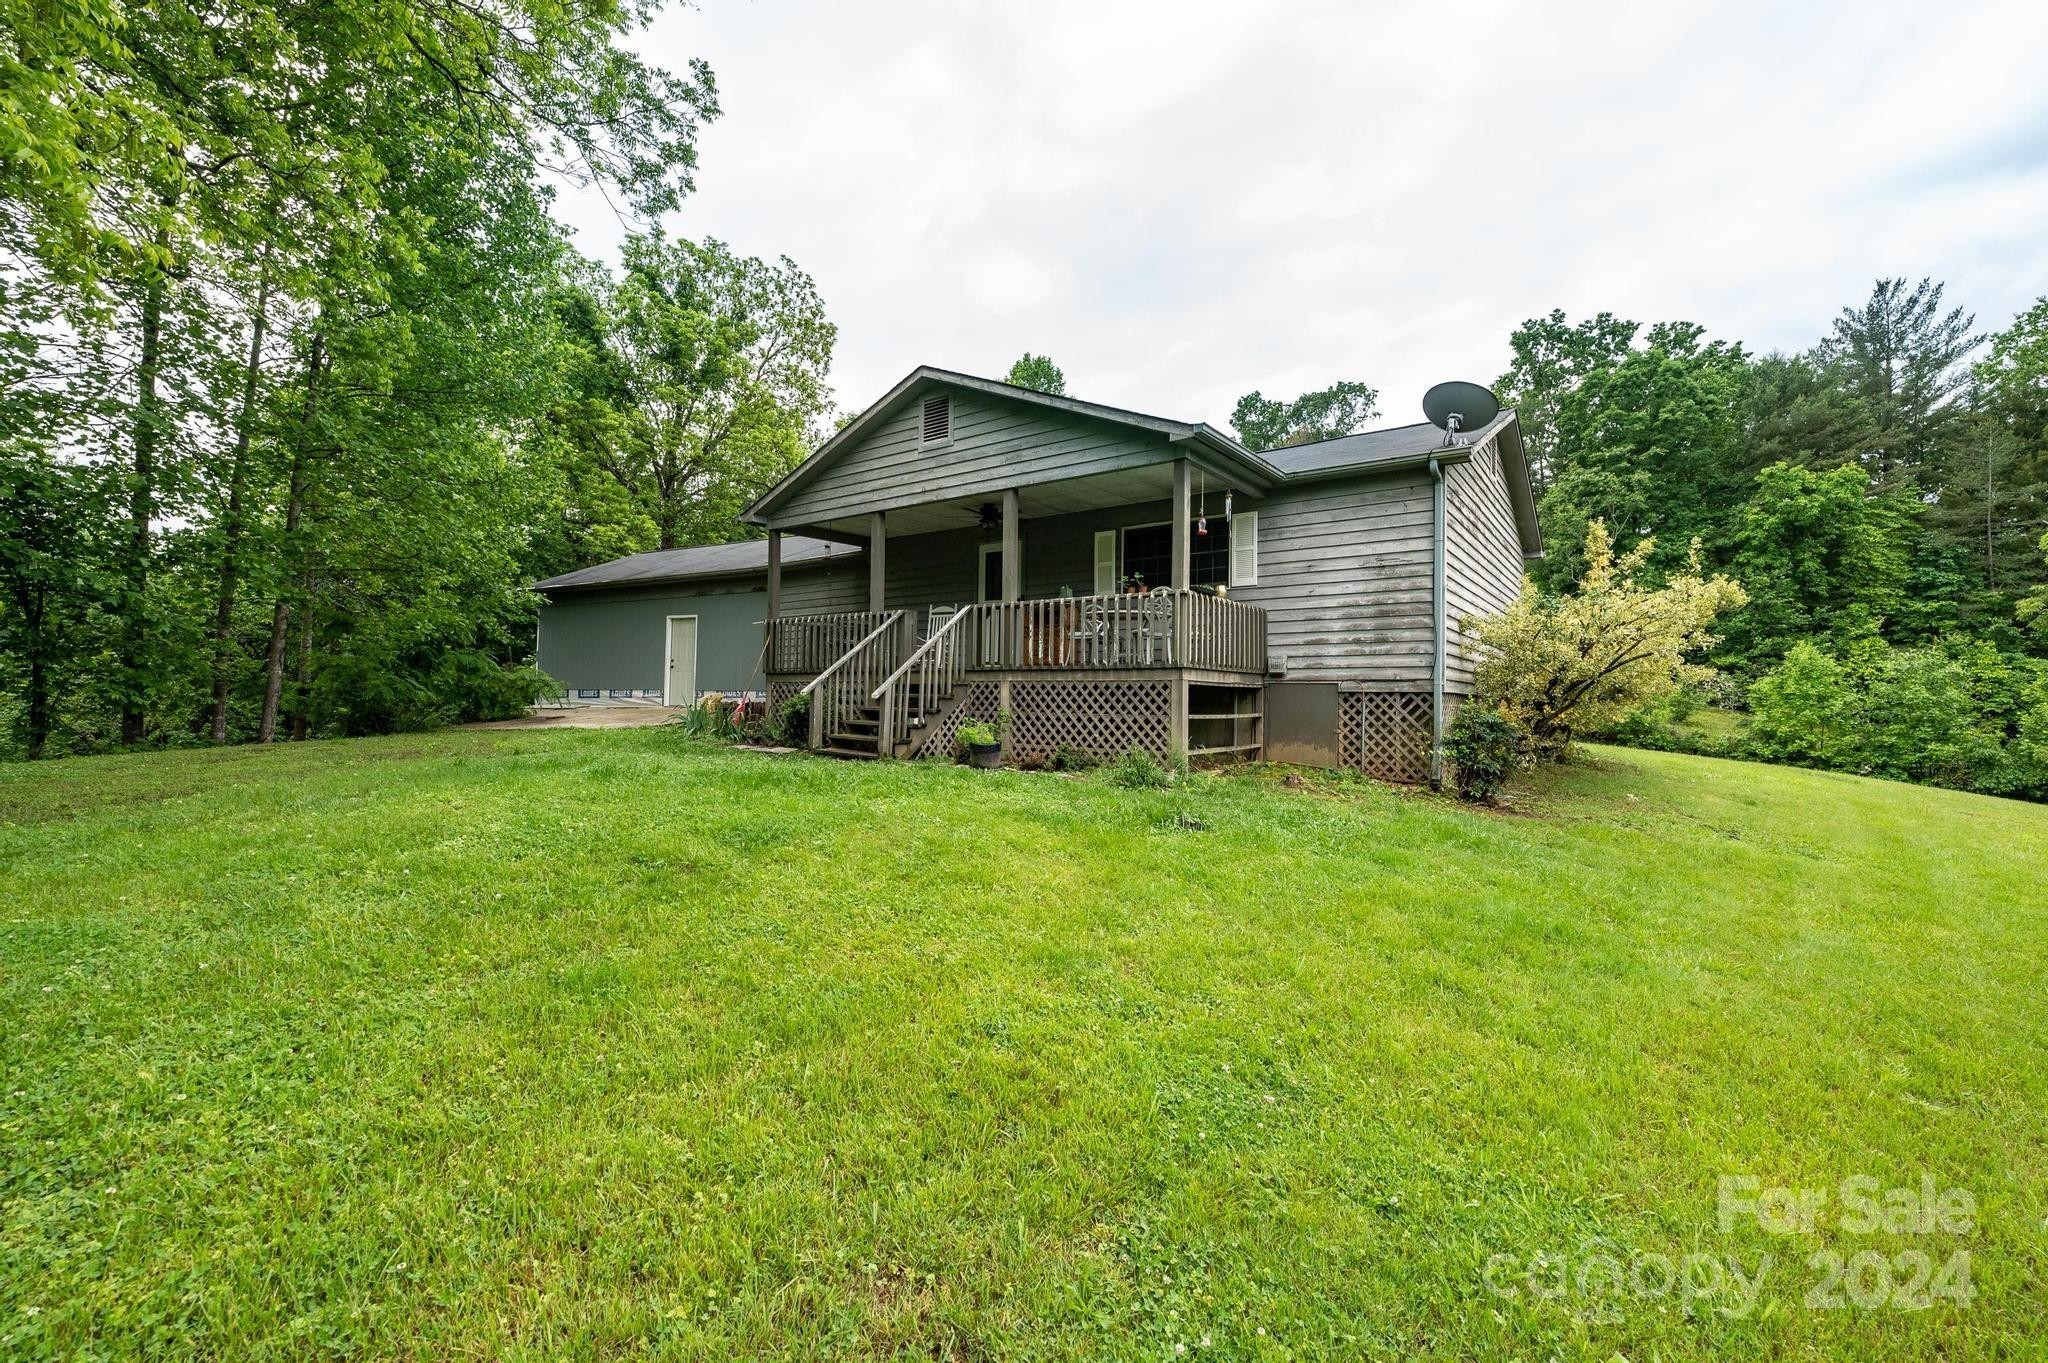 2. 2029 Mulberry Creek Road